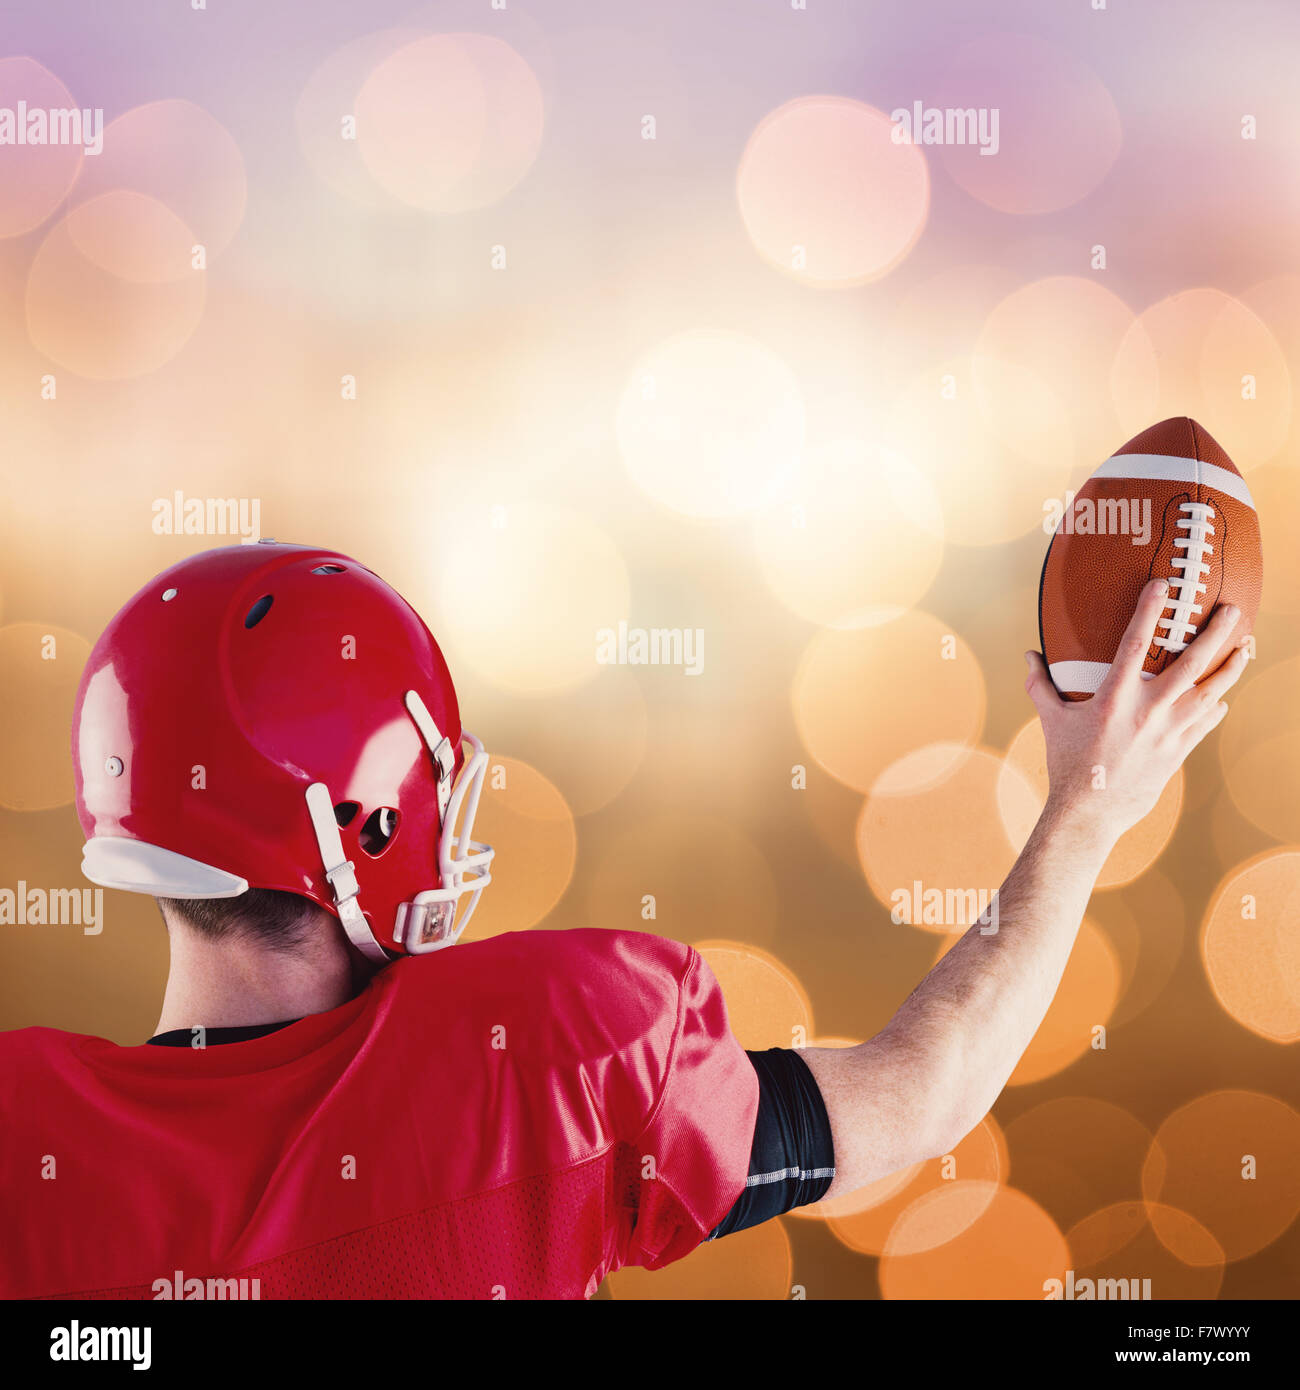 Composite image of american football player holding up foot Banque D'Images